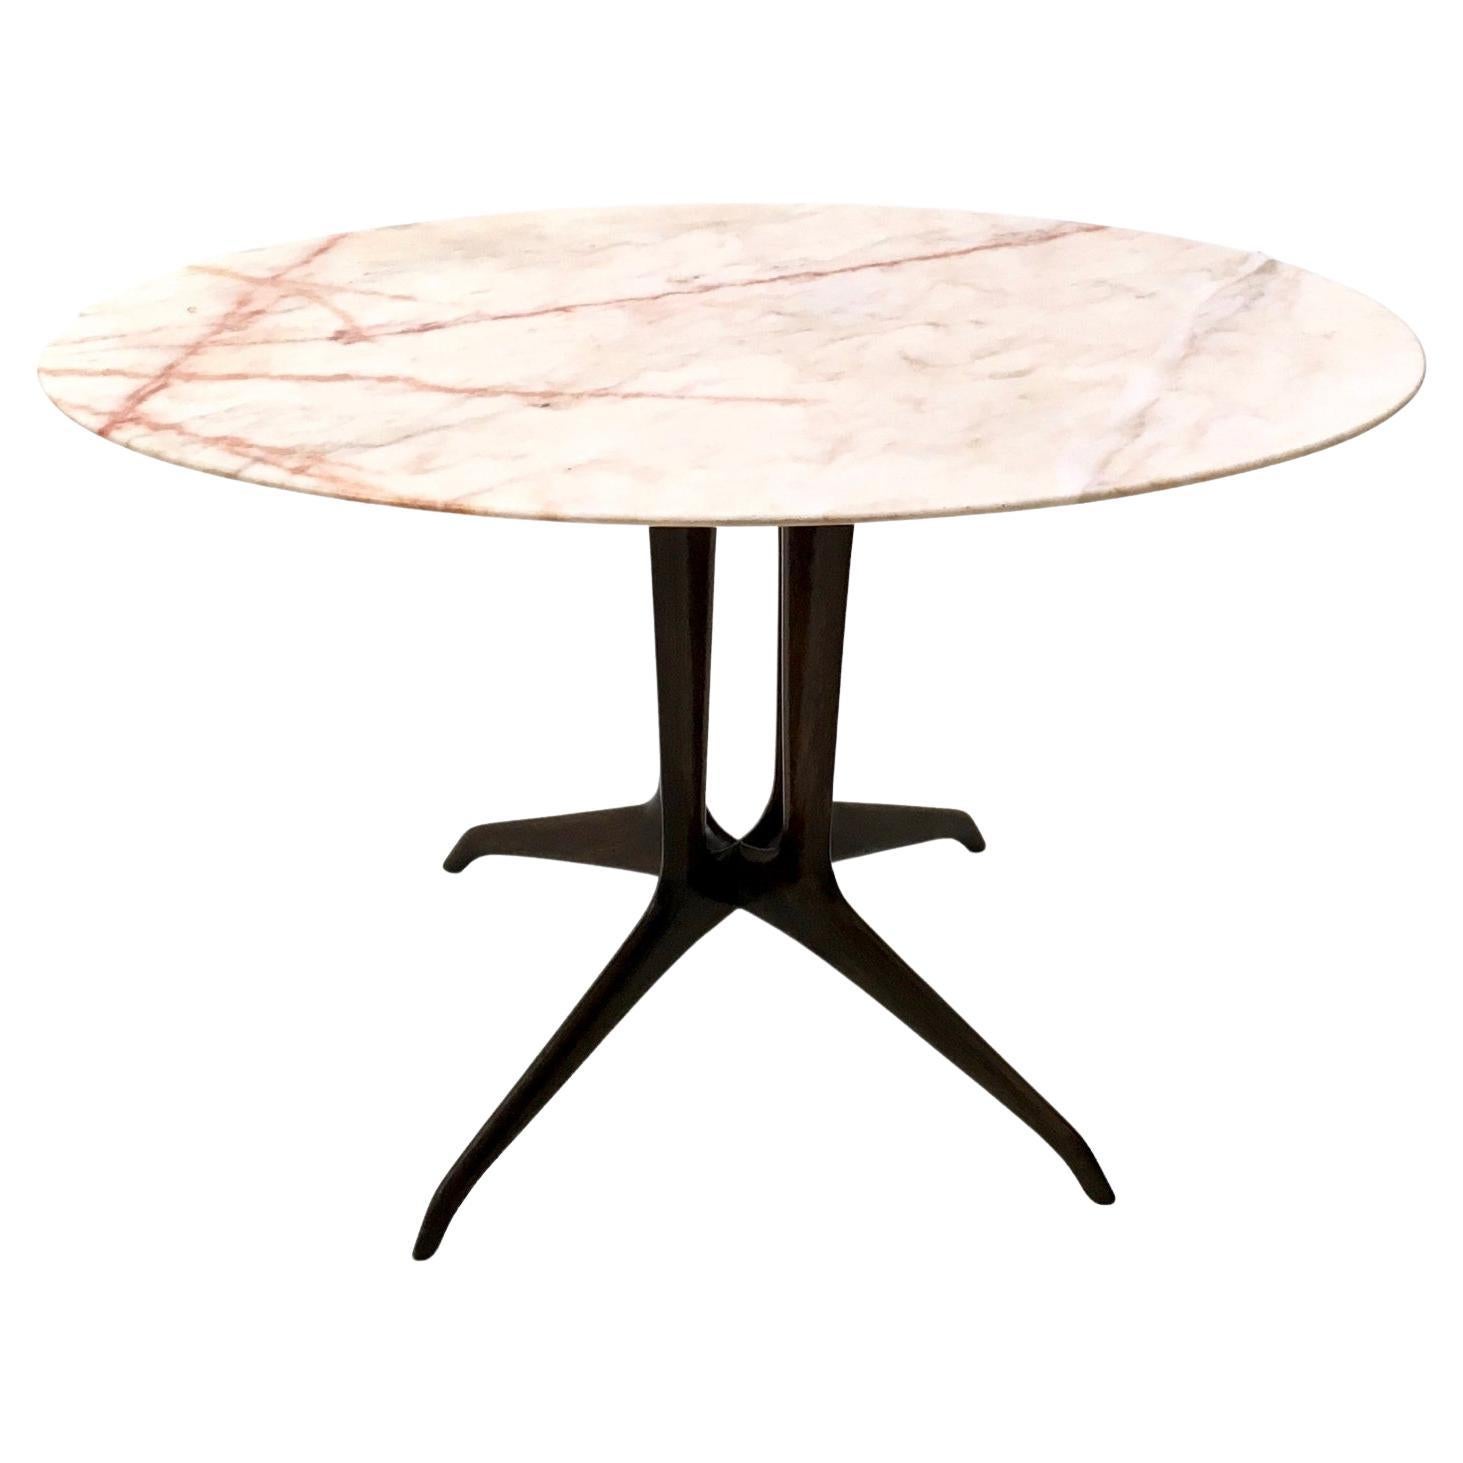 Made in Italy, 1950s.
This coffee table features an ebonized beech pedestal and an oval Portuguese pink marble top.
It is a vintage piece, therefore it might show slight traces of use, but it can be considered as in excellent original condition and